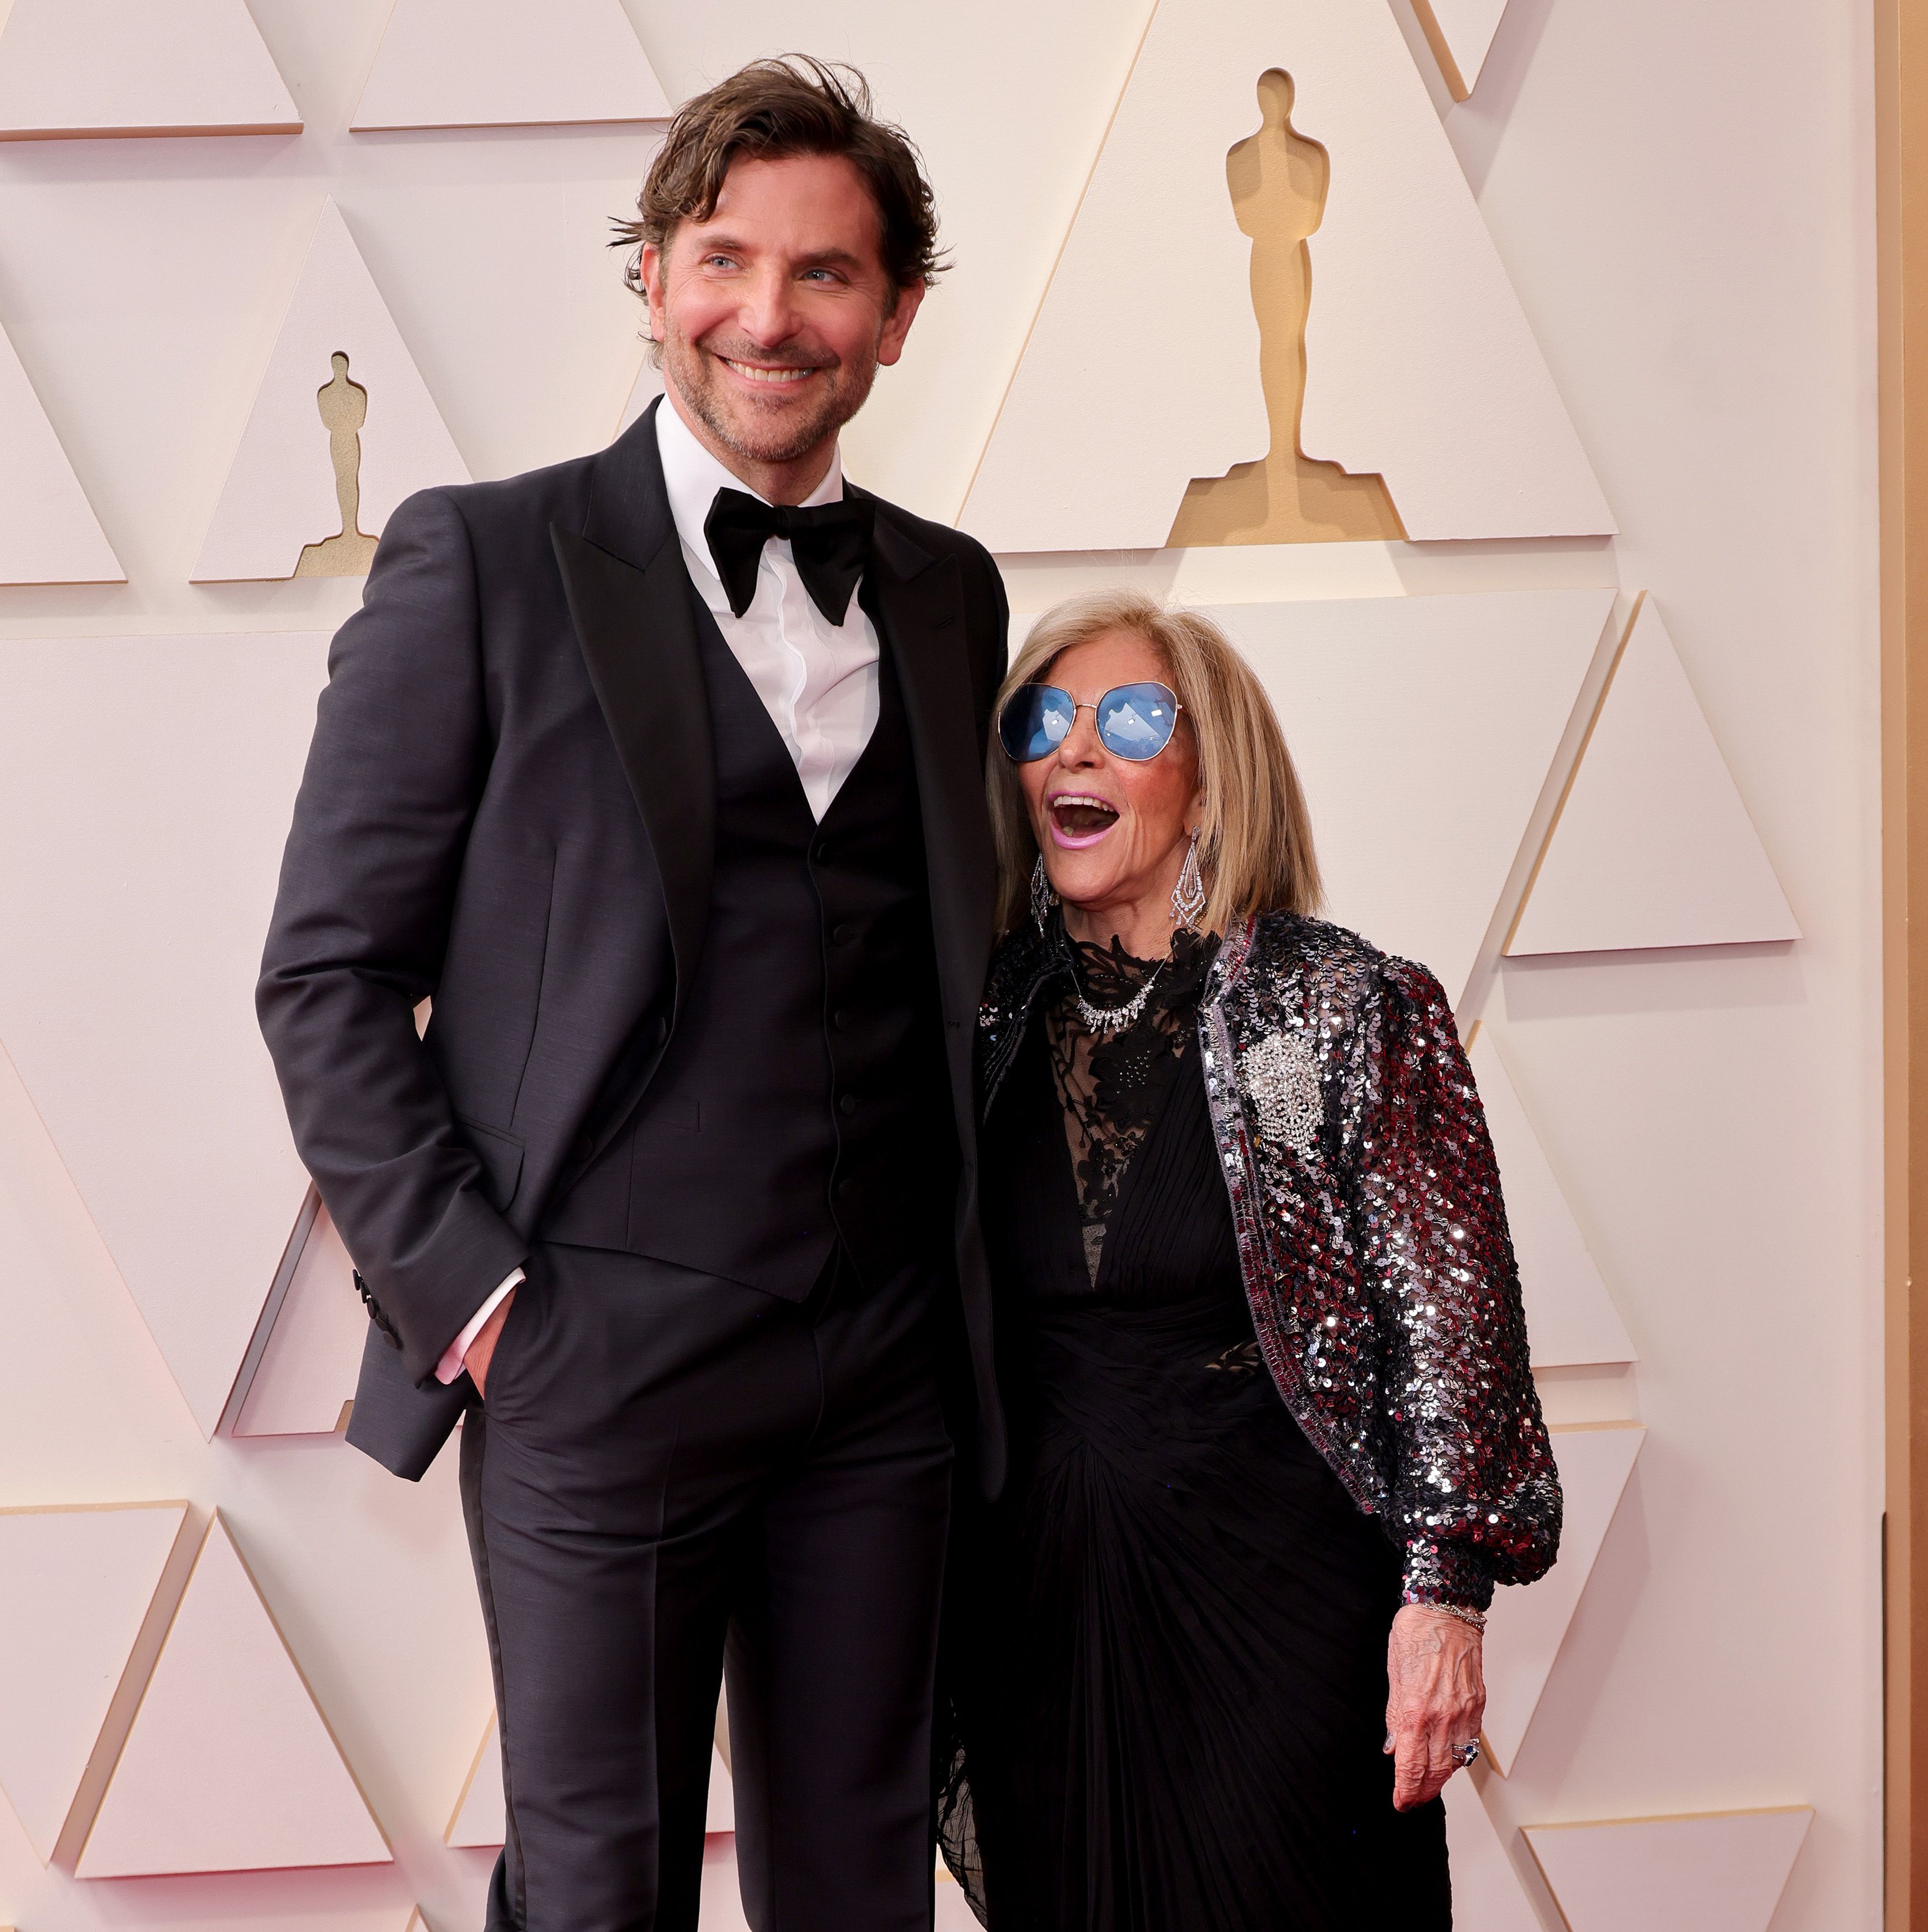 You better believe Bradley Cooper brought a cute date to the 2022 Oscars and walked the red carpet with her...